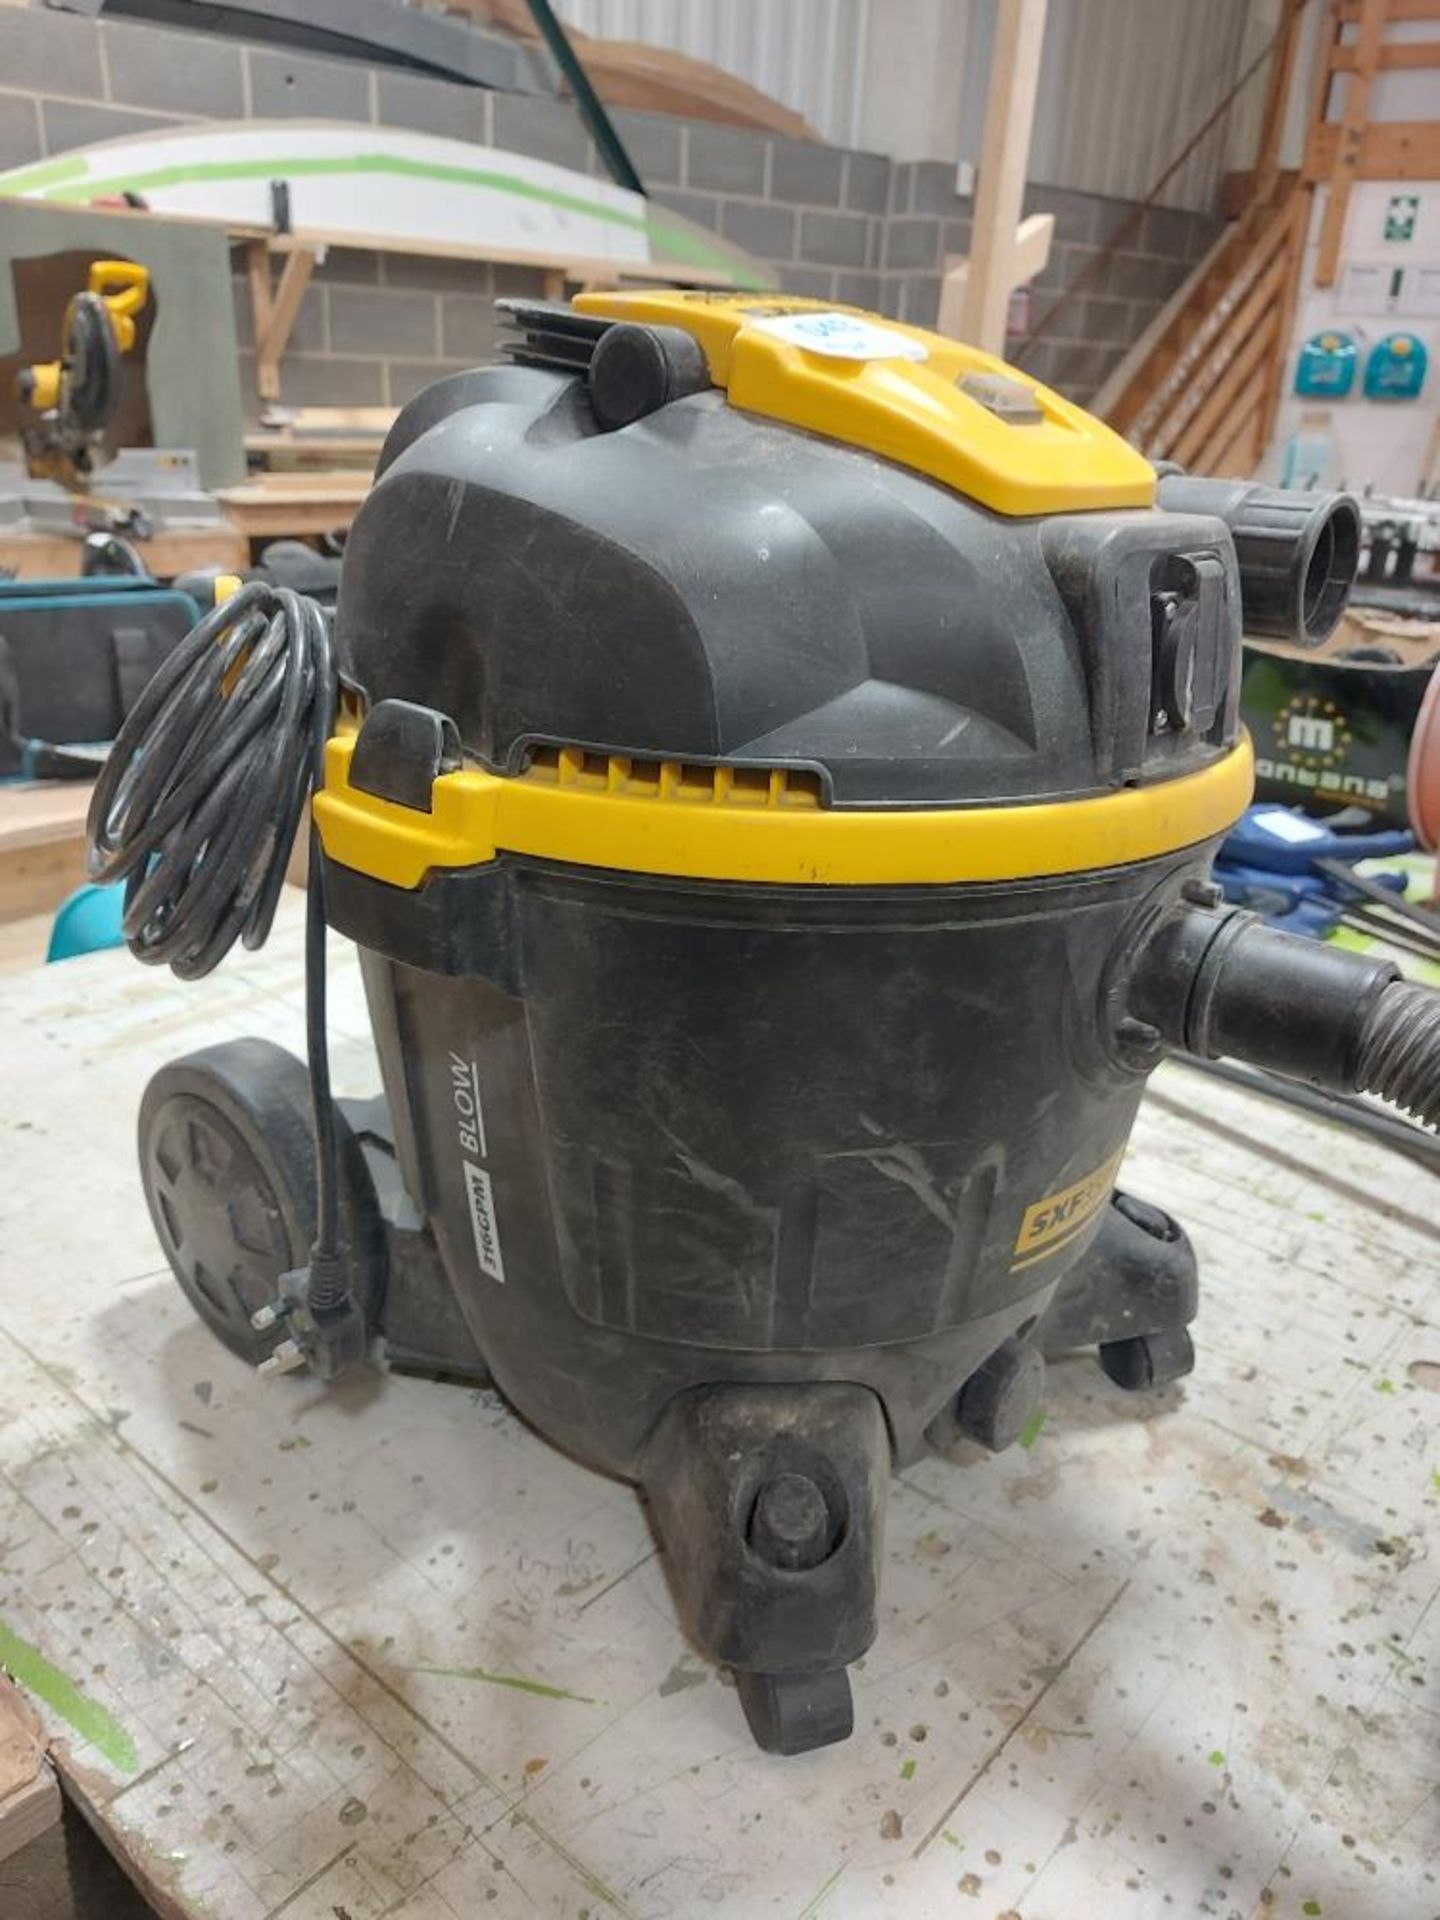 Stanley Fatmax 316GPM Wet / Dry Vacuum - Image 3 of 5